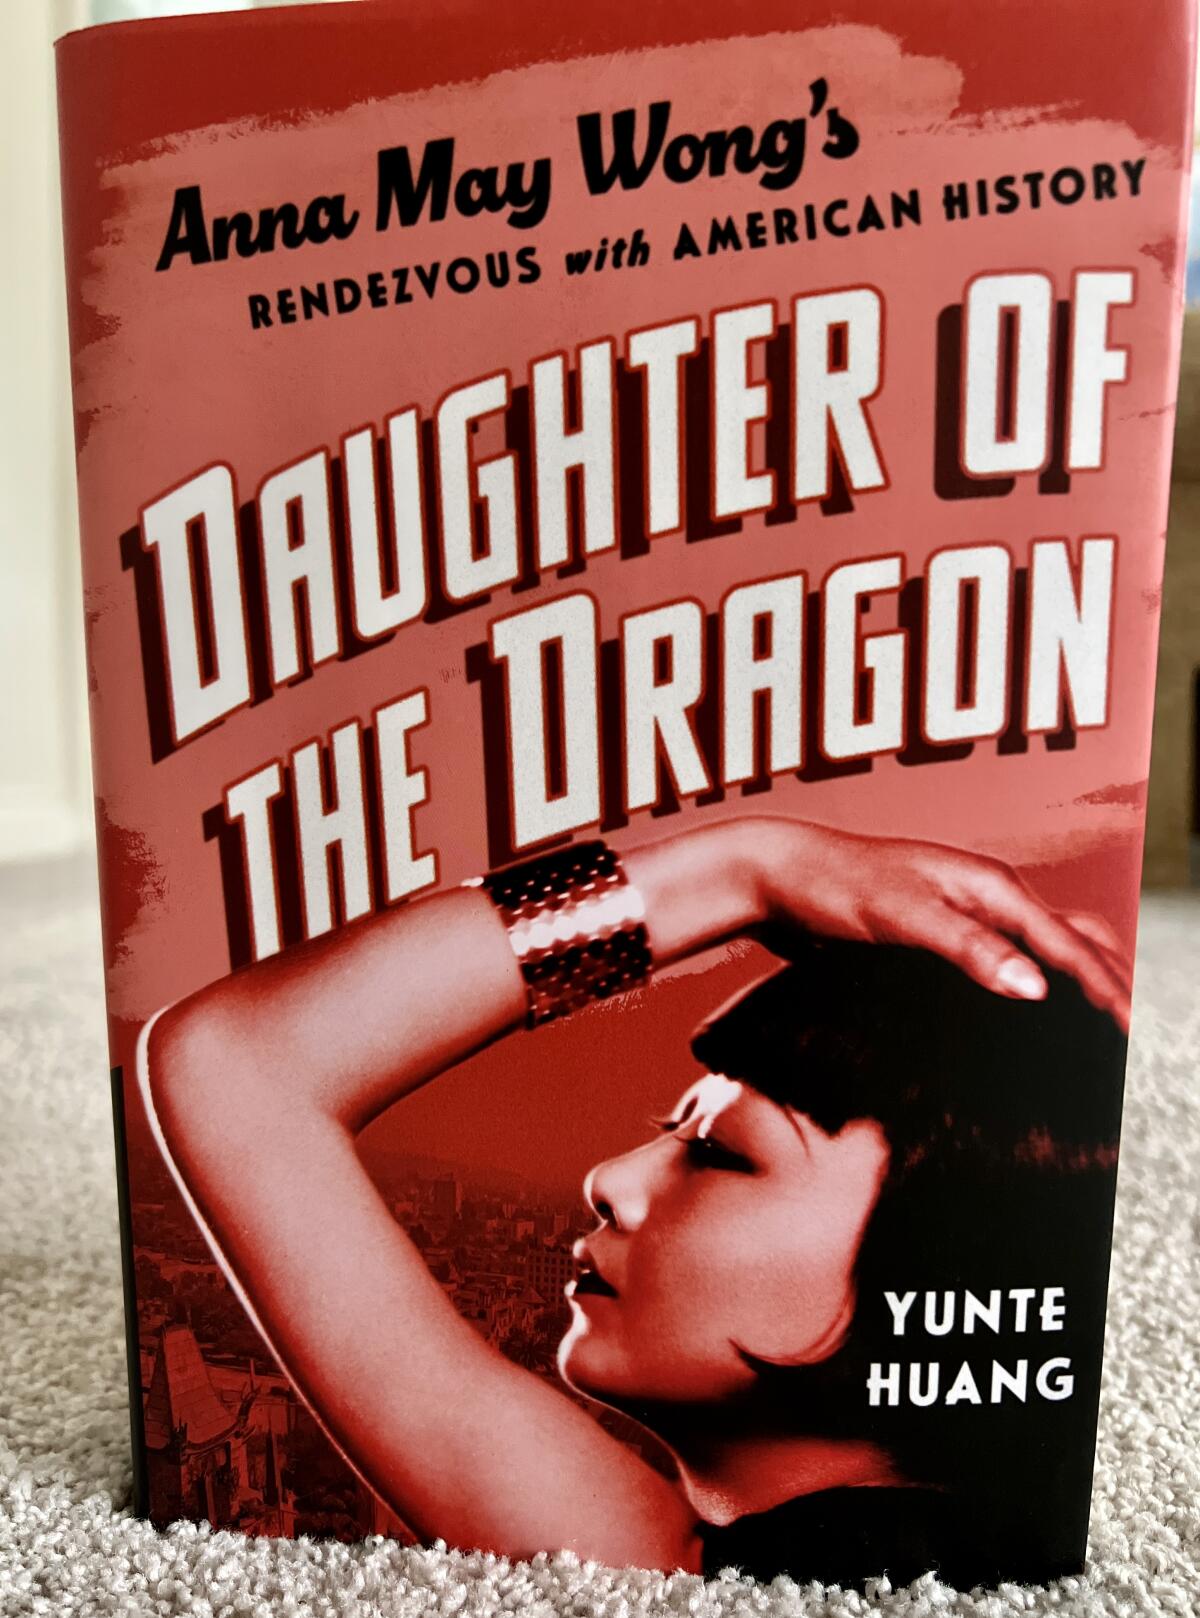 D.G. Wills bookstore will present UC Santa Barbara professor and author Yunte Huang on Thursday, Aug. 24, in La Jolla.